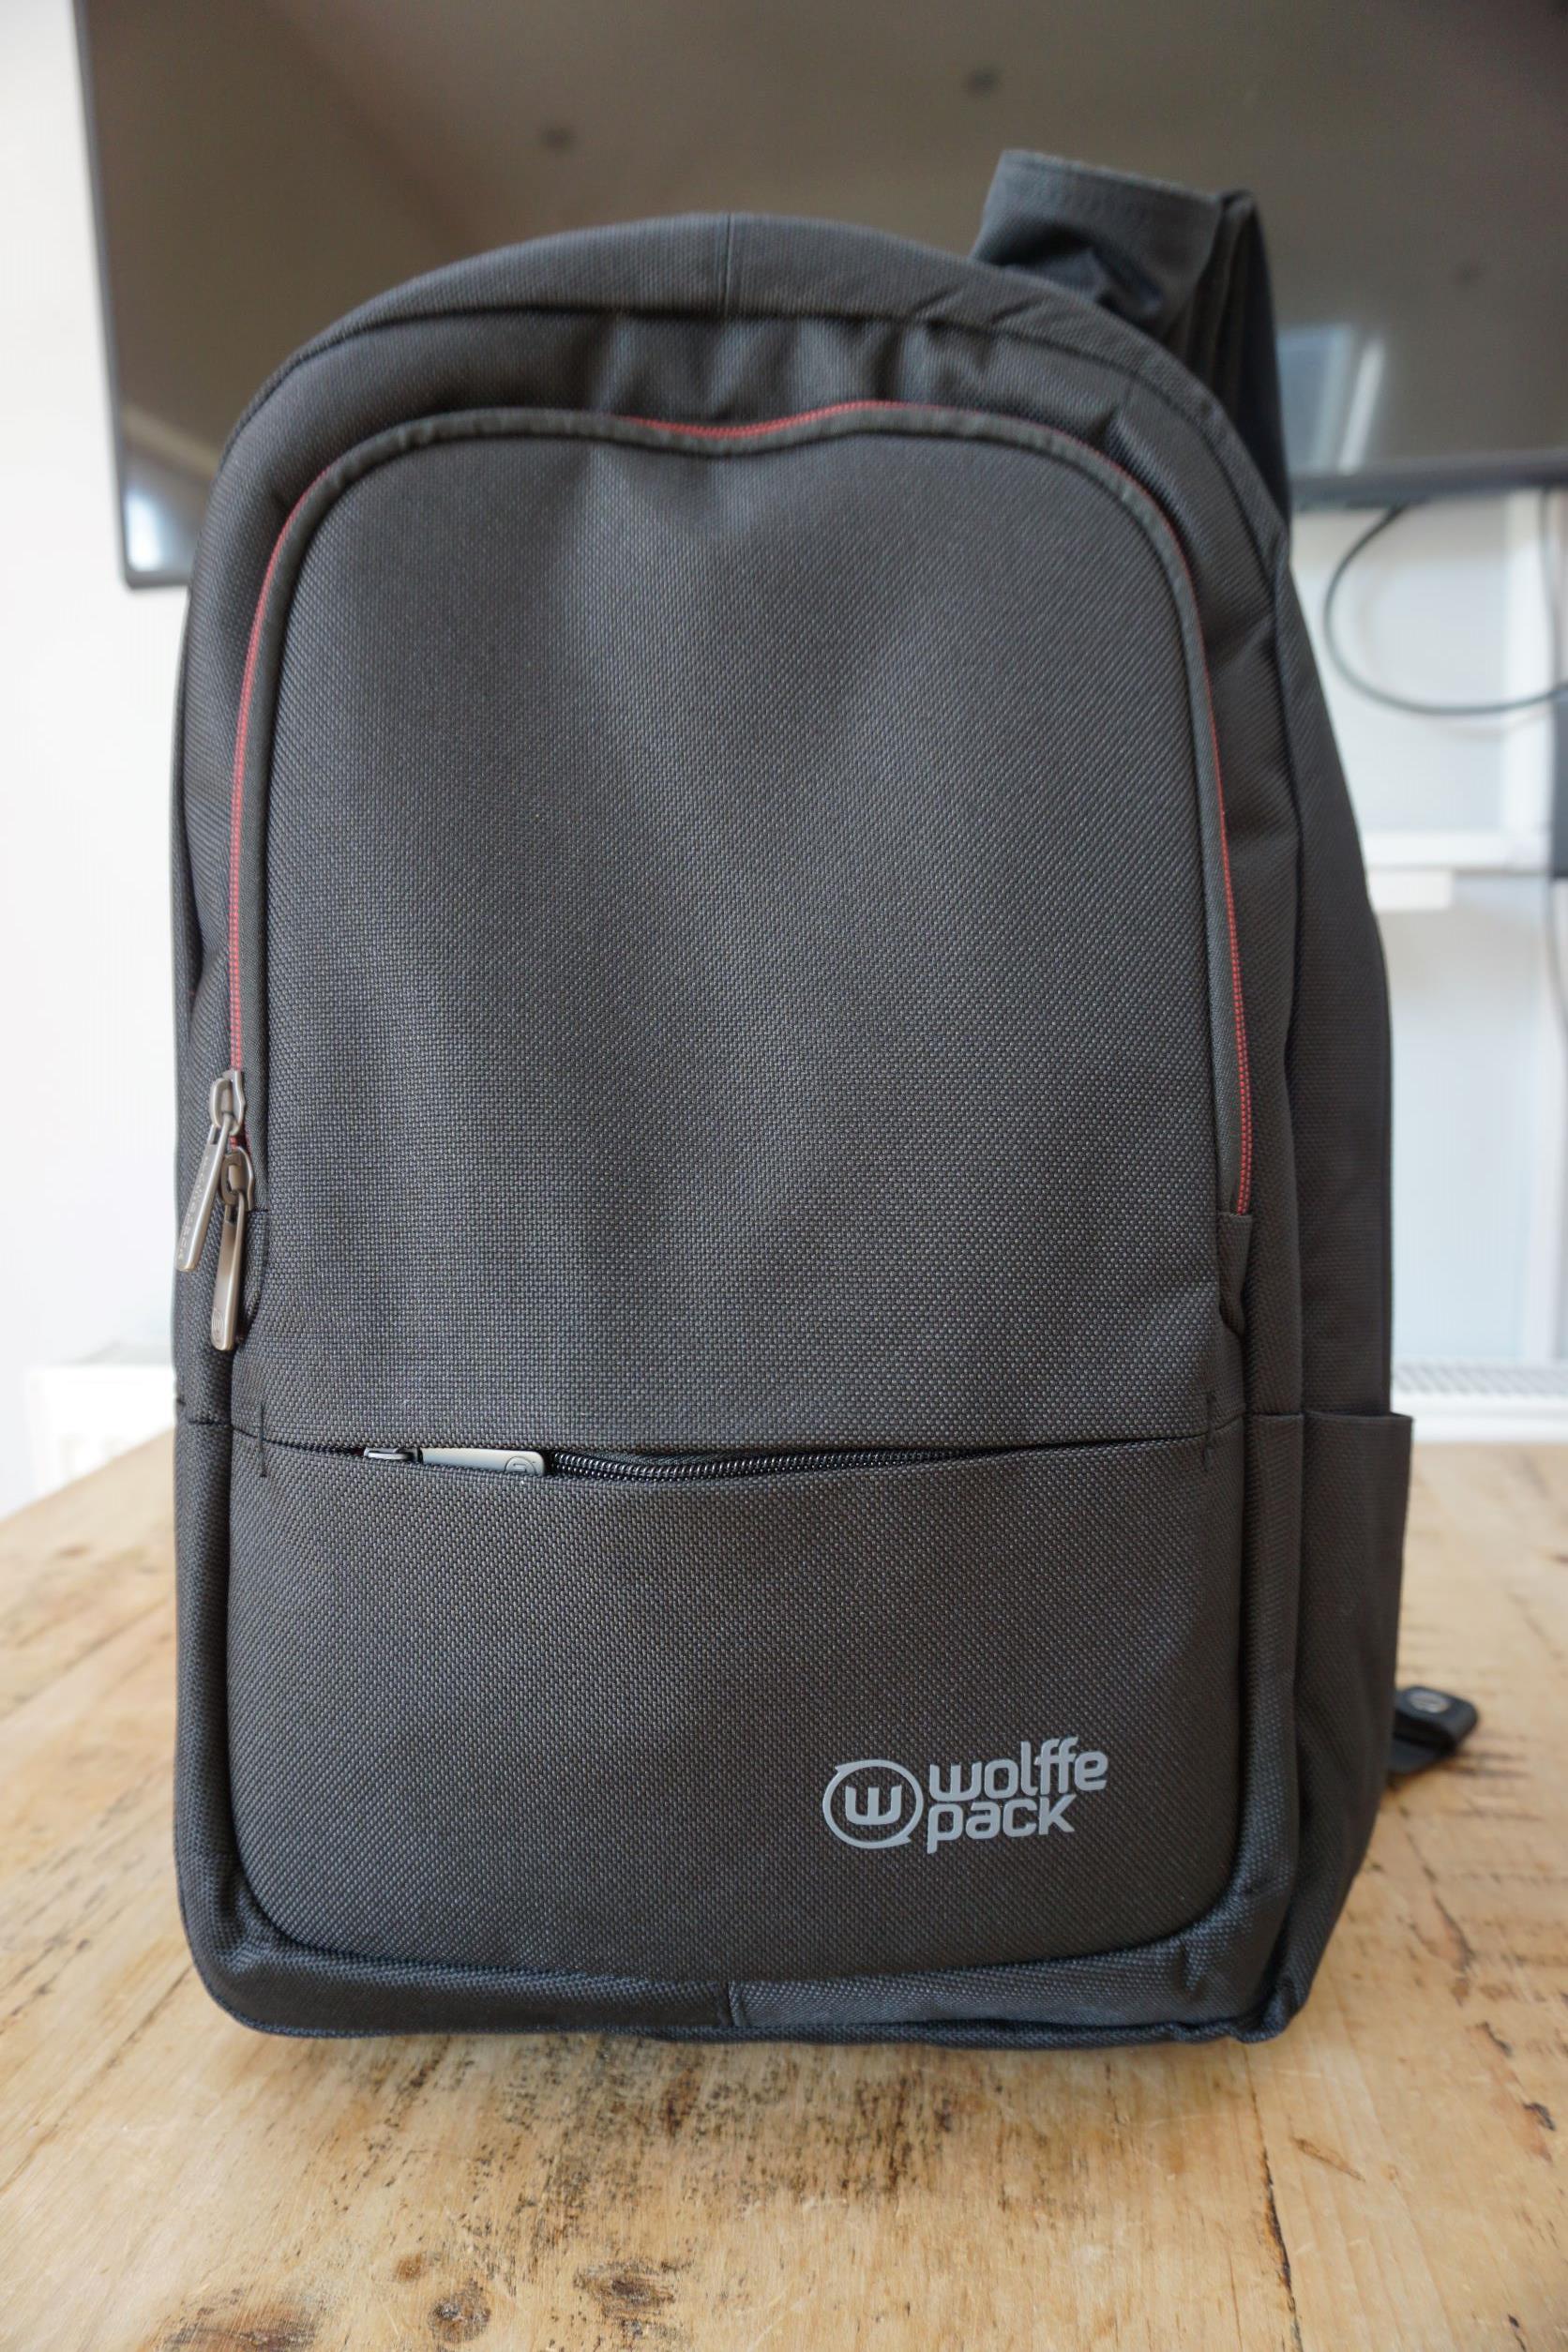 Wolffe Pack Metro Backpack for Travel/Commuting Black